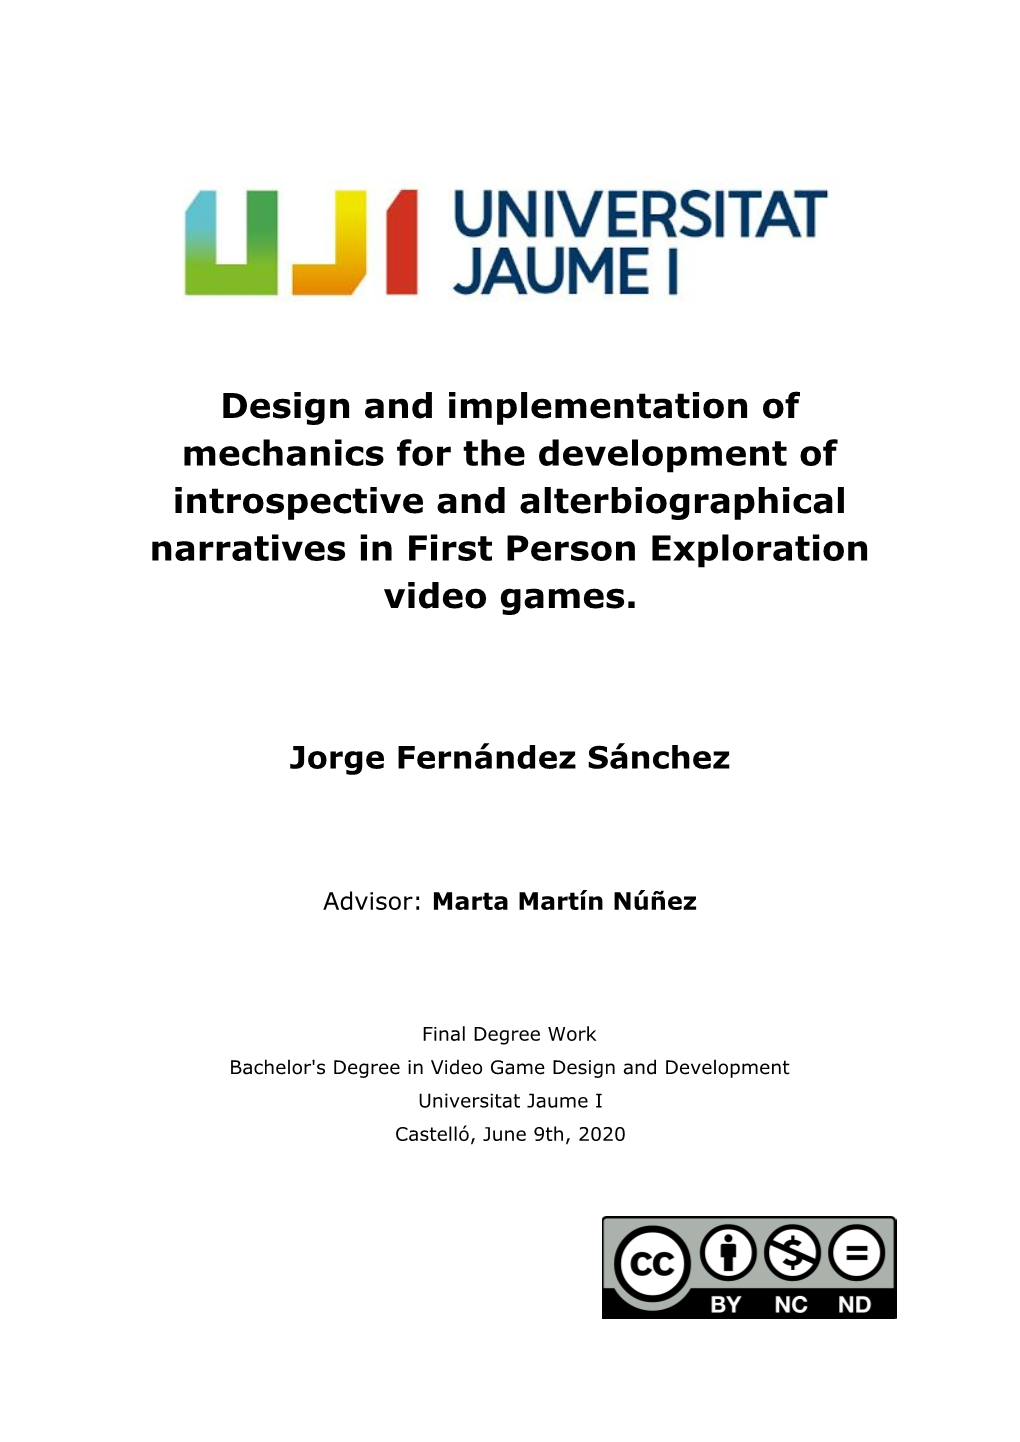 Design and Implementation of Mechanics for the Development of Introspective and Alterbiographical Narratives in First Person Exploration Video Games